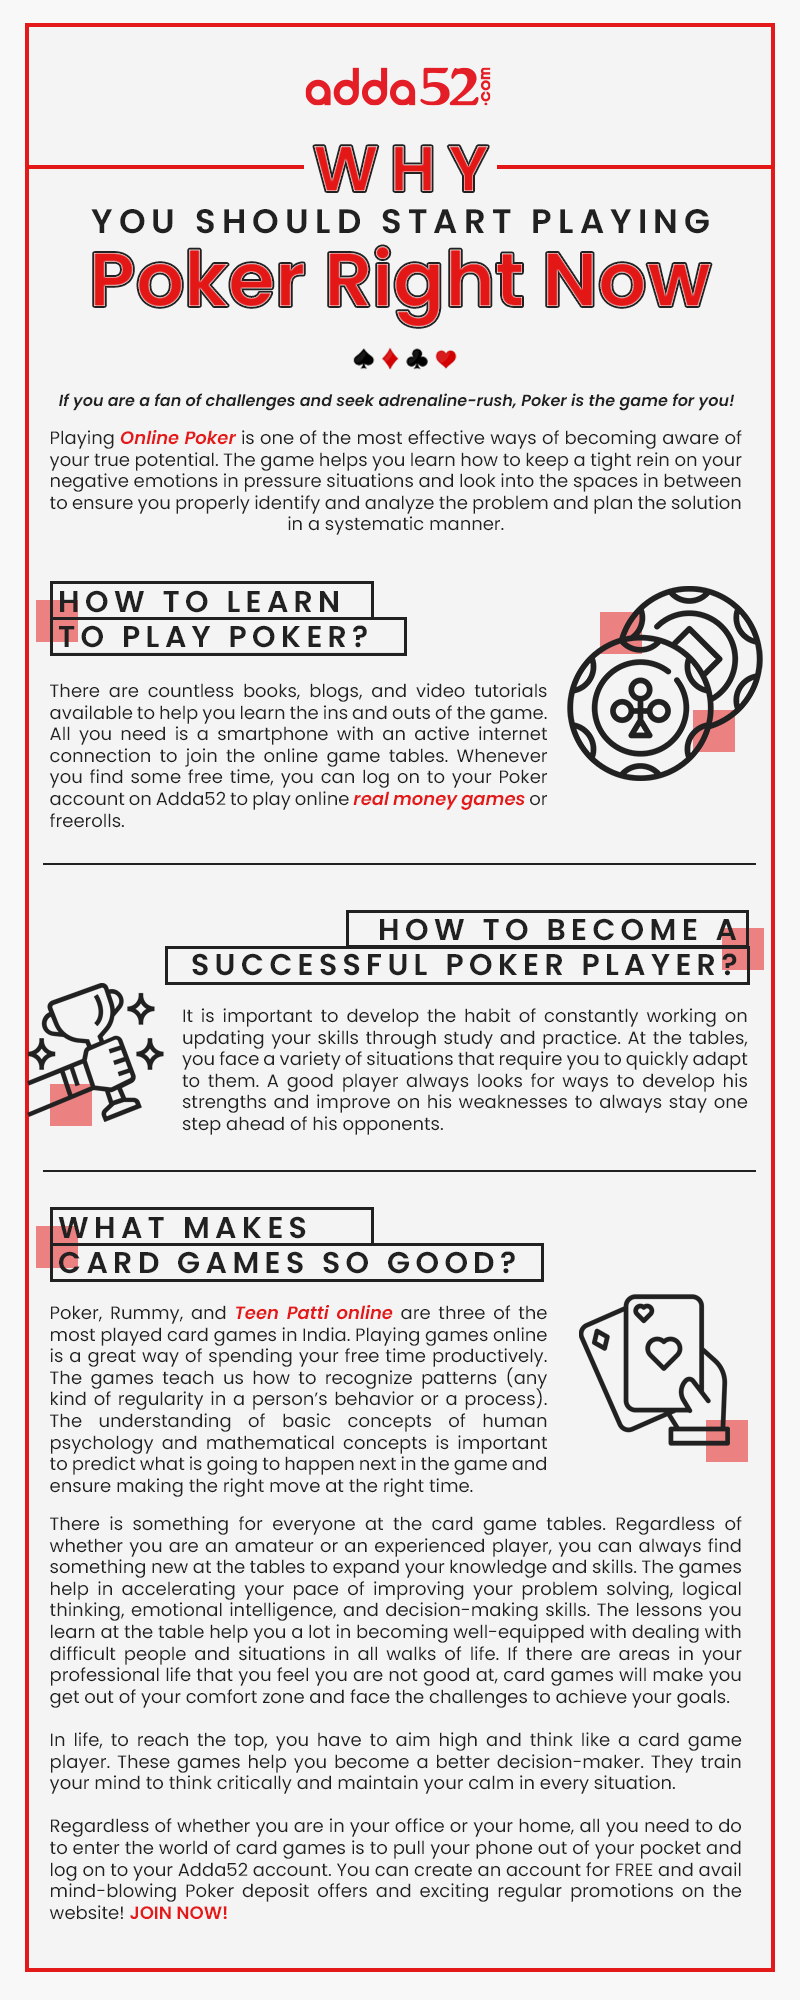 Why You Should Start Playing Poker Right Now